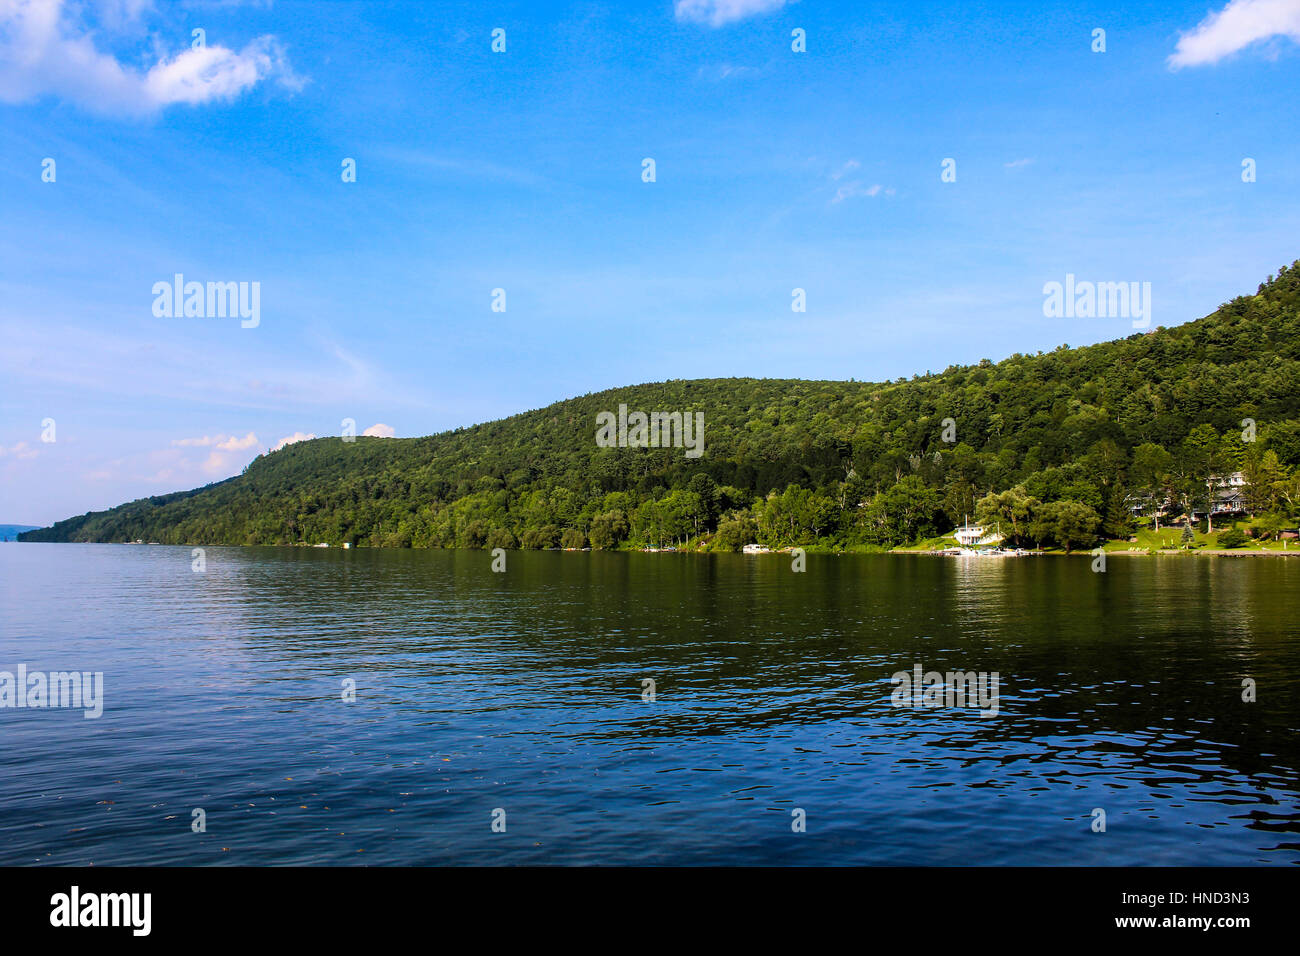 Lake Landscape, Cooperstown, New York, USA Stock Photo